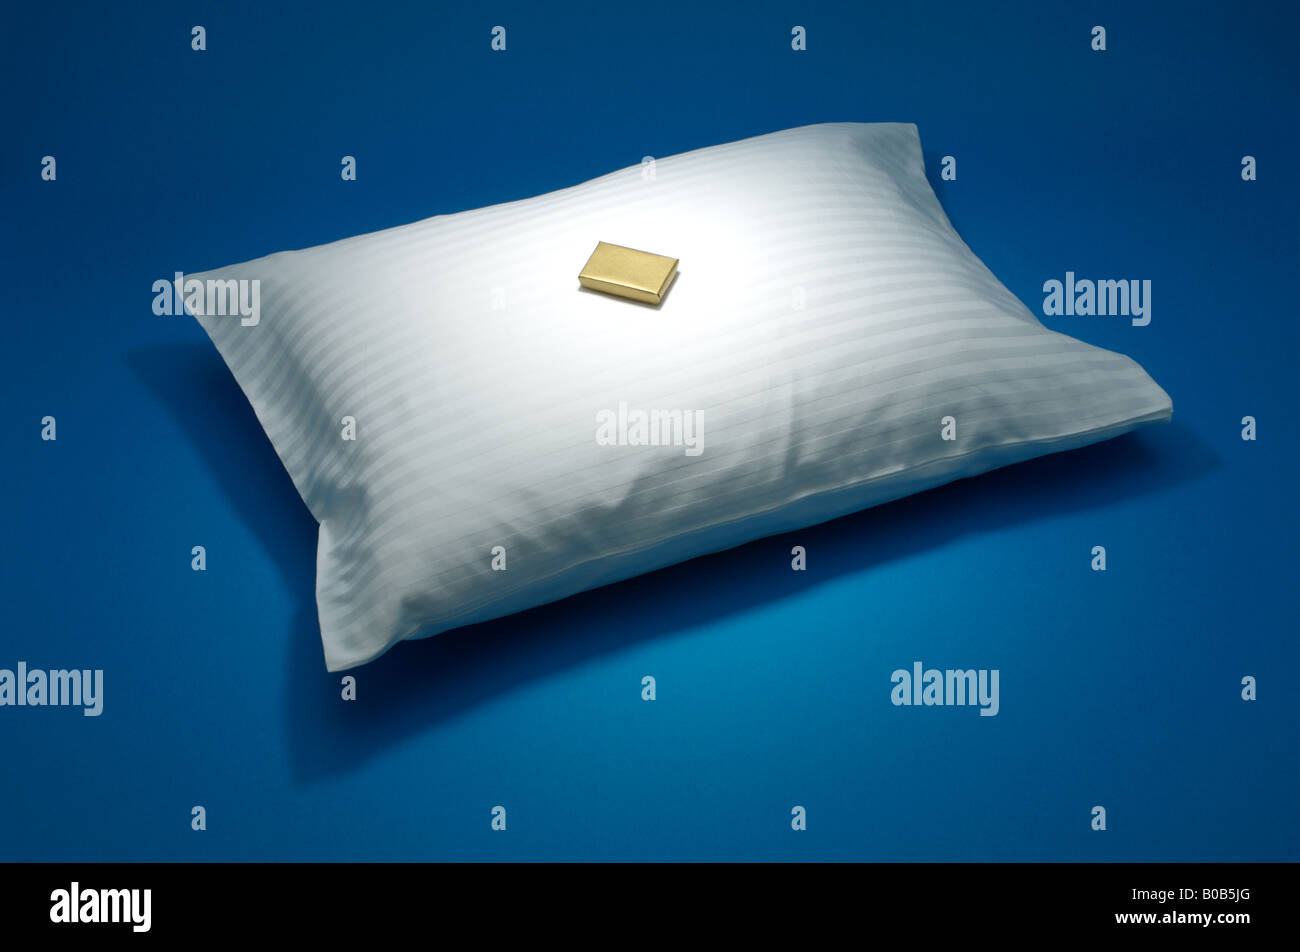 A white pillow with a small gold box, blue background Stock Photo